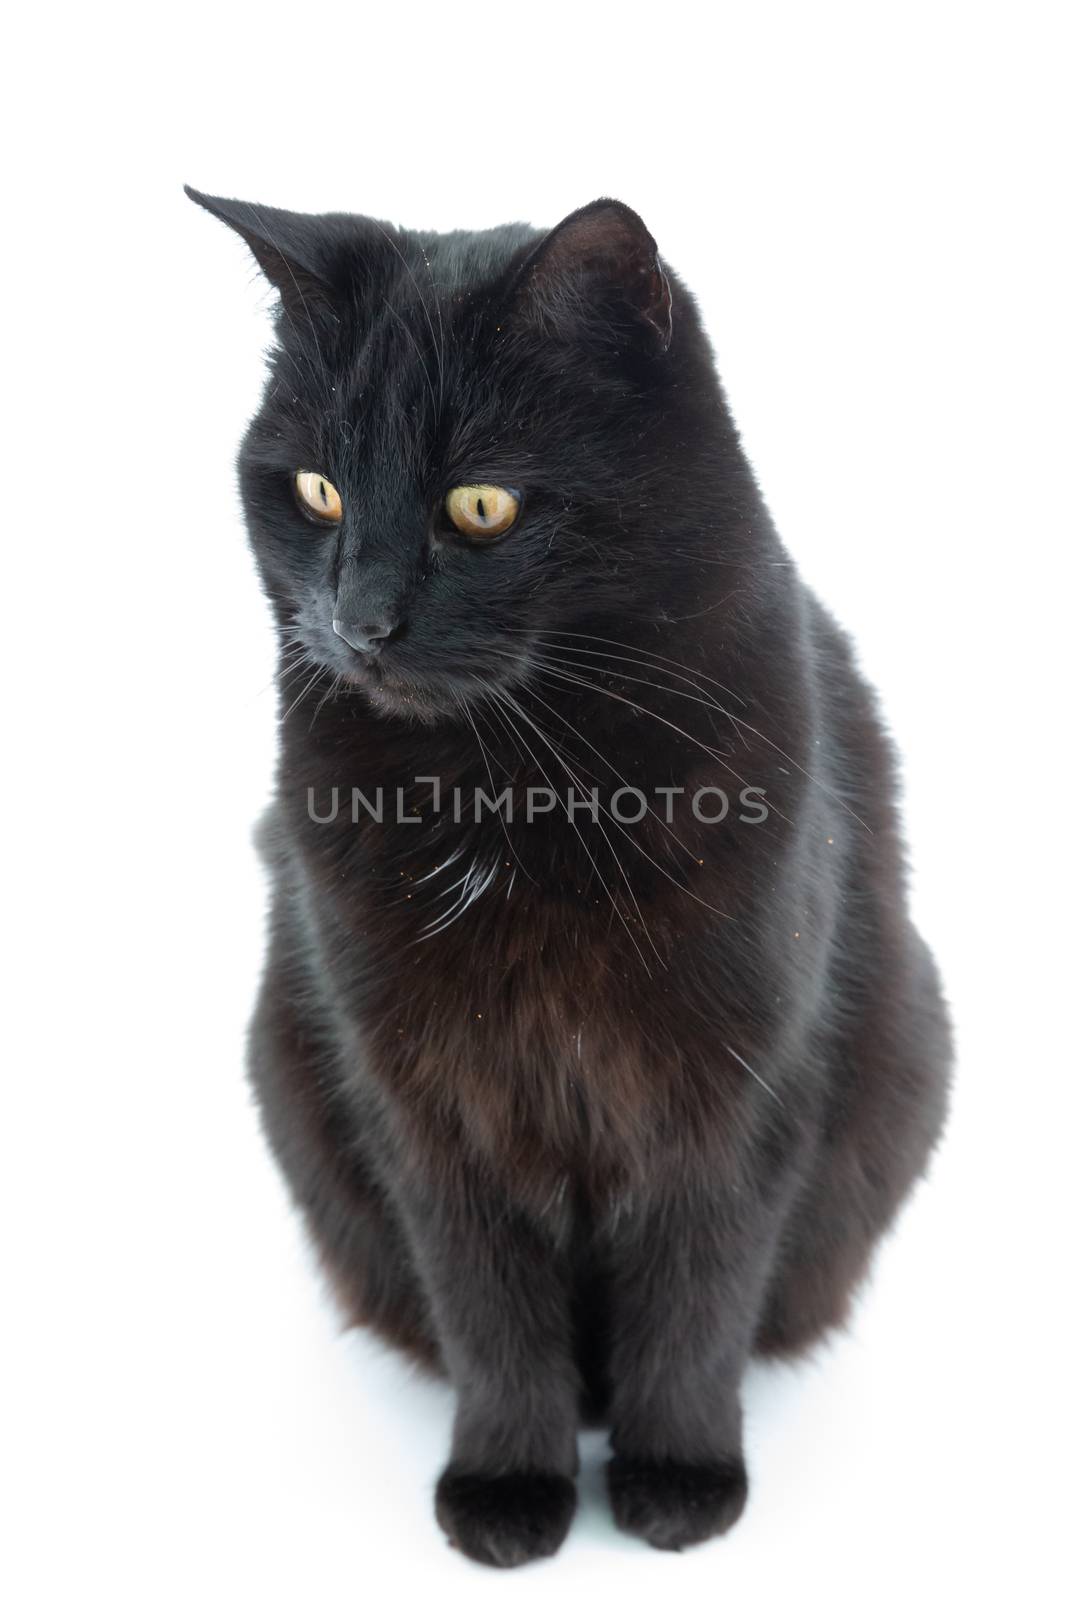 A beautiful black cat poses on a white background by 25ehaag6